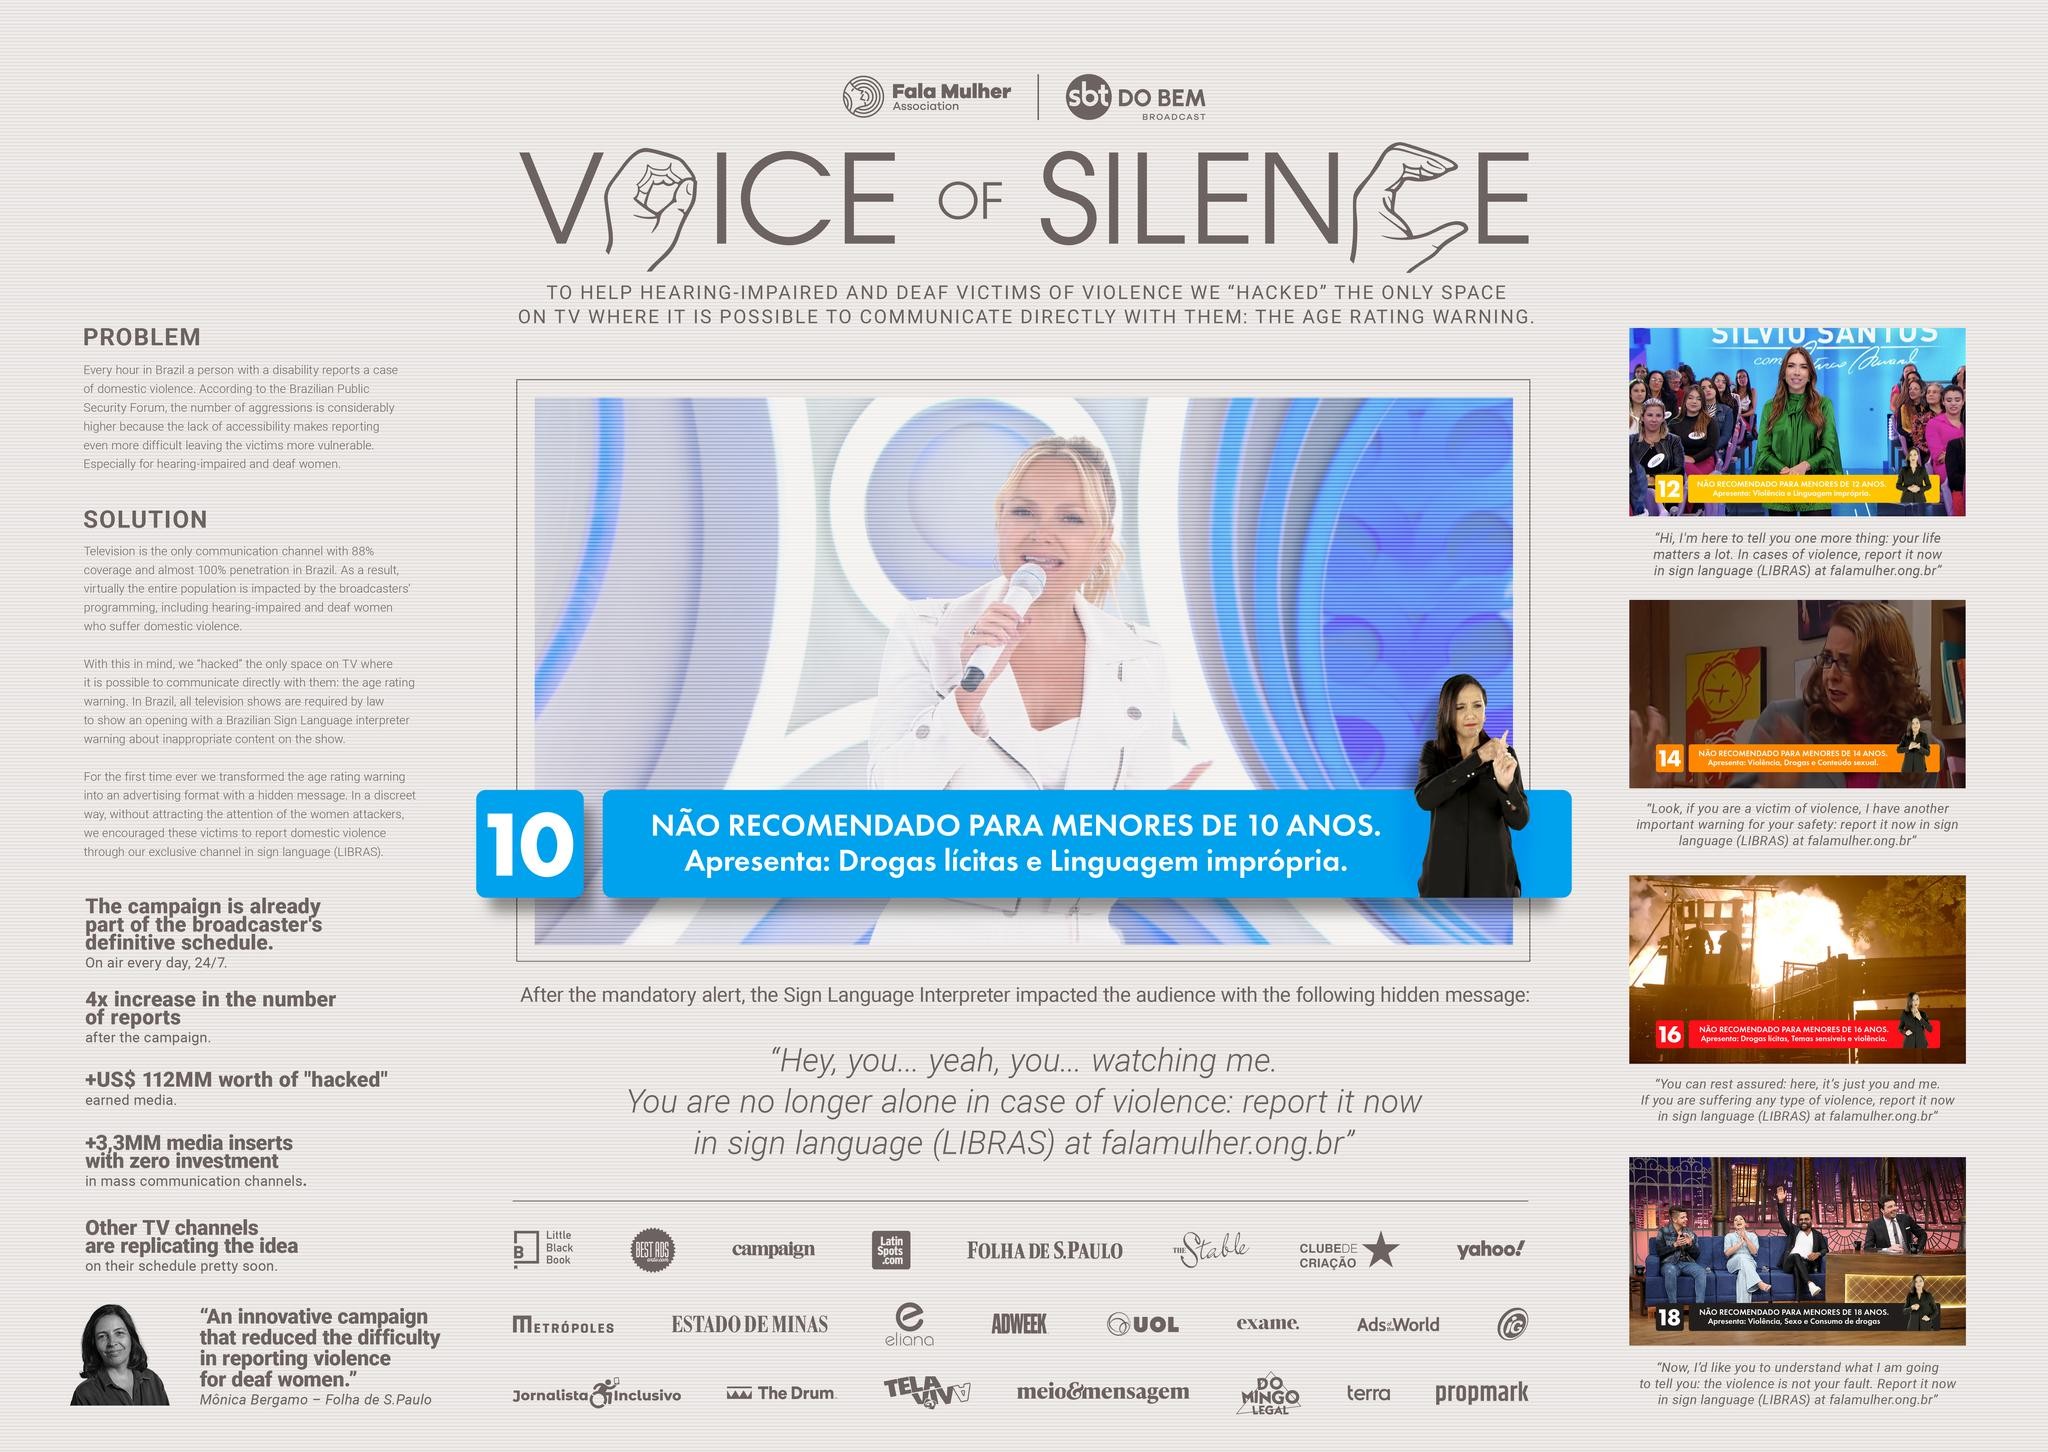 VOICE OF SILENCE